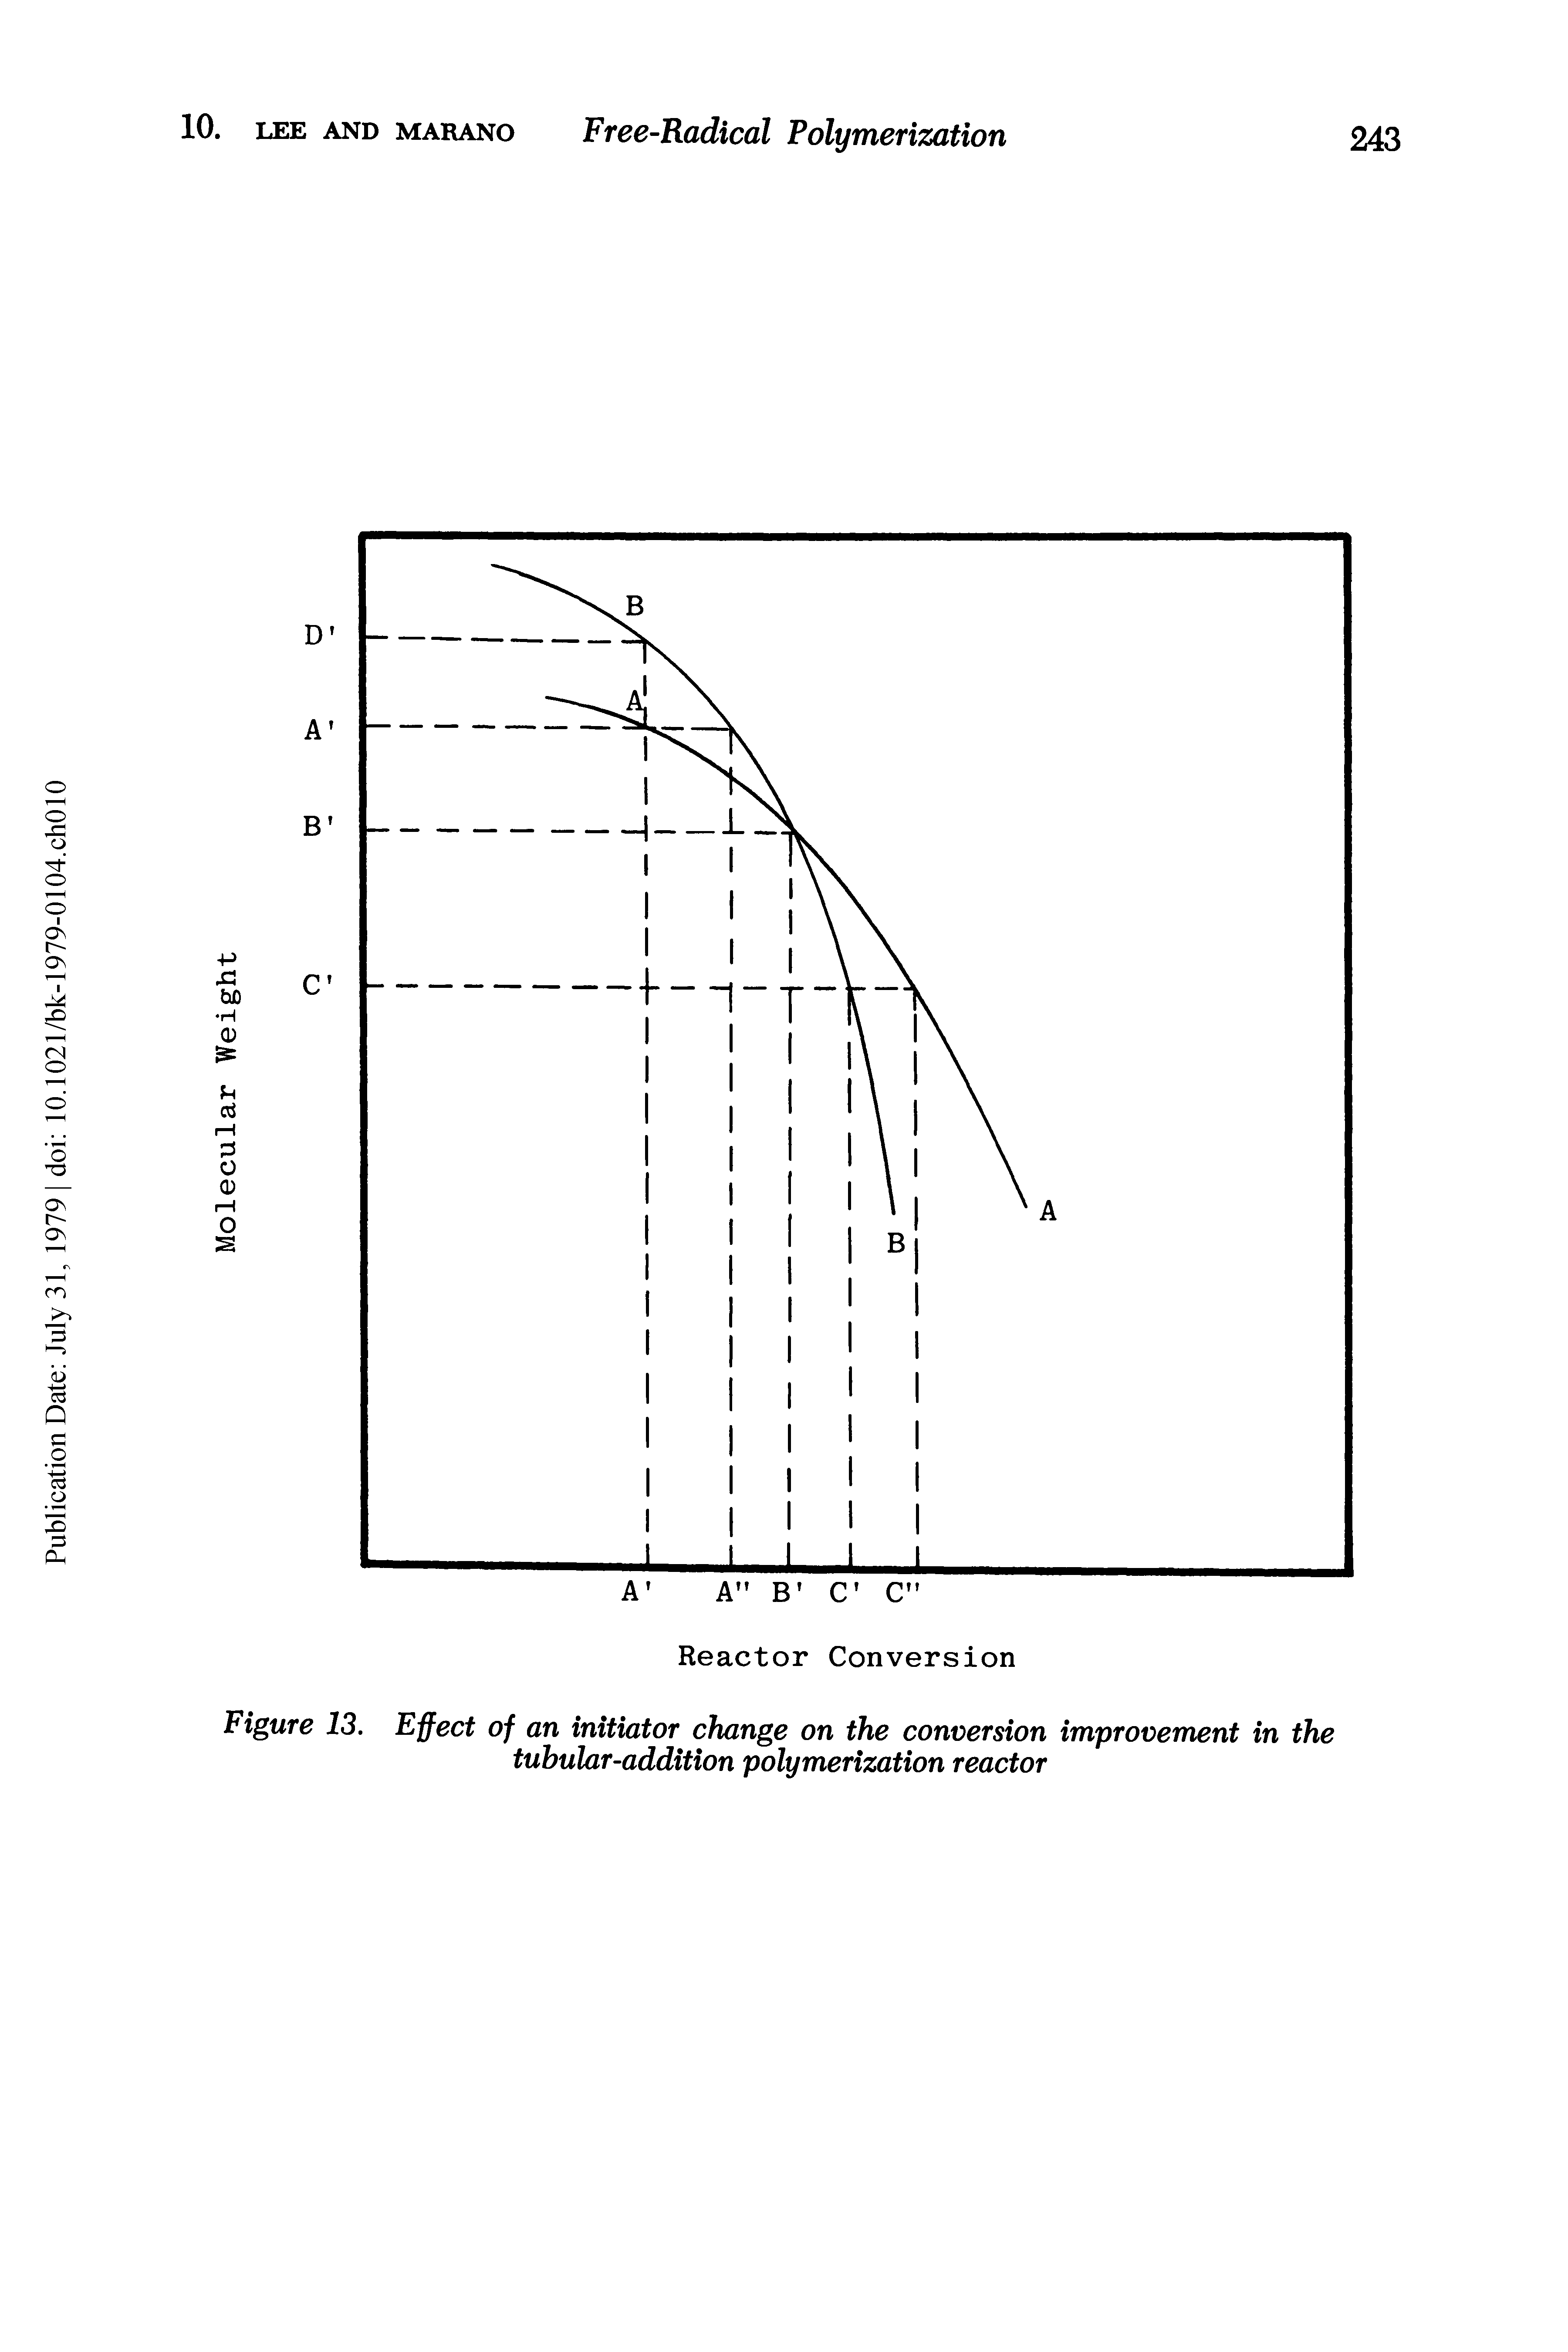 Figure 13. Effect of an initiator change on the conversion improvement in the tubular-addition polymerization reactor...